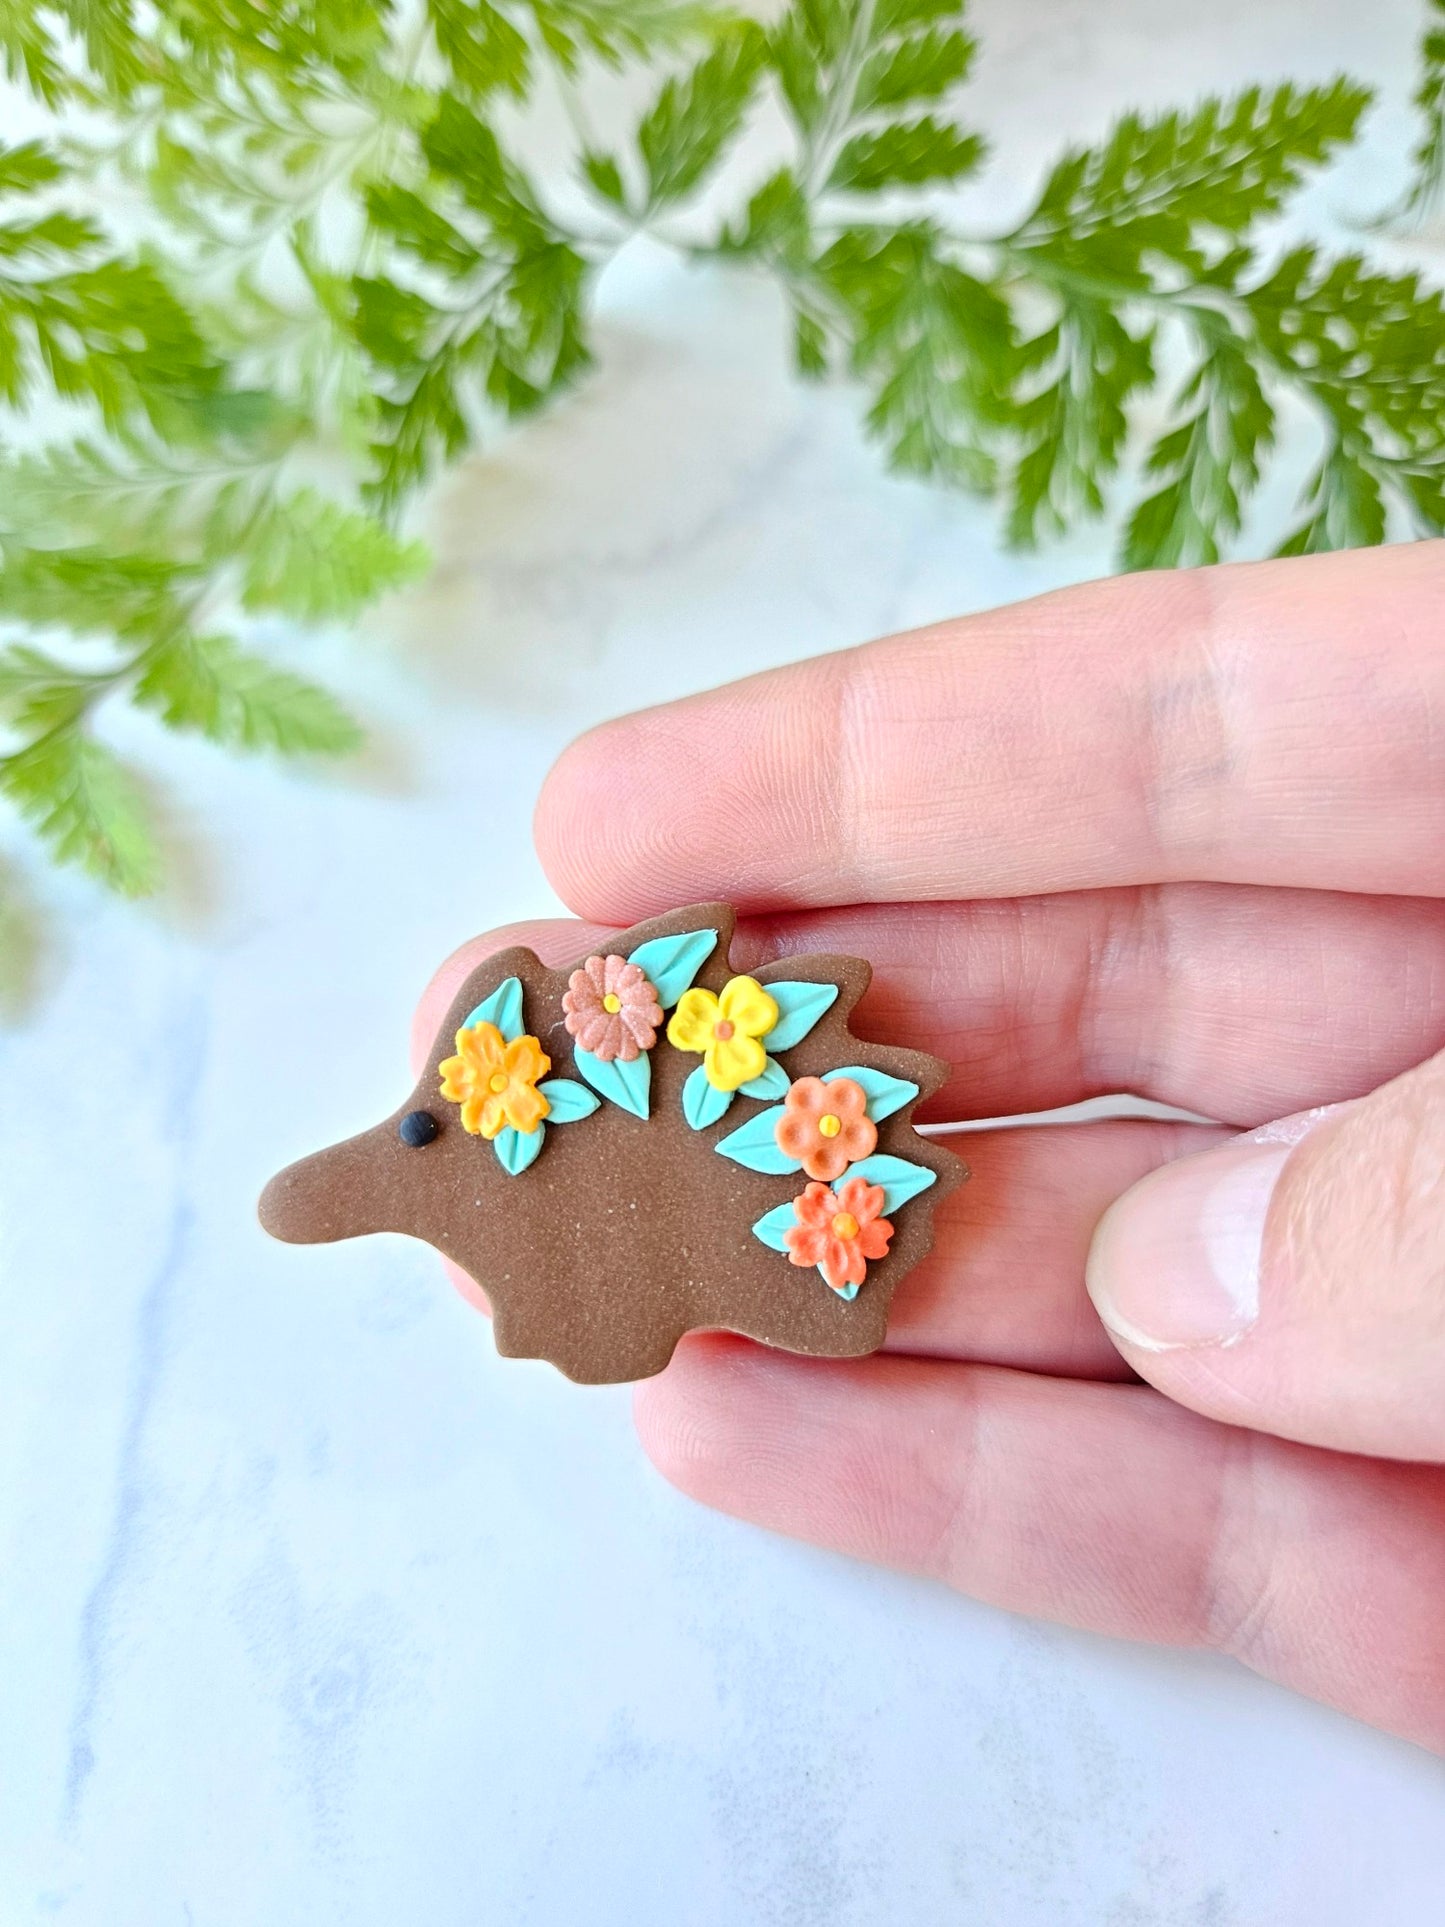 Echidna brooch with flowers